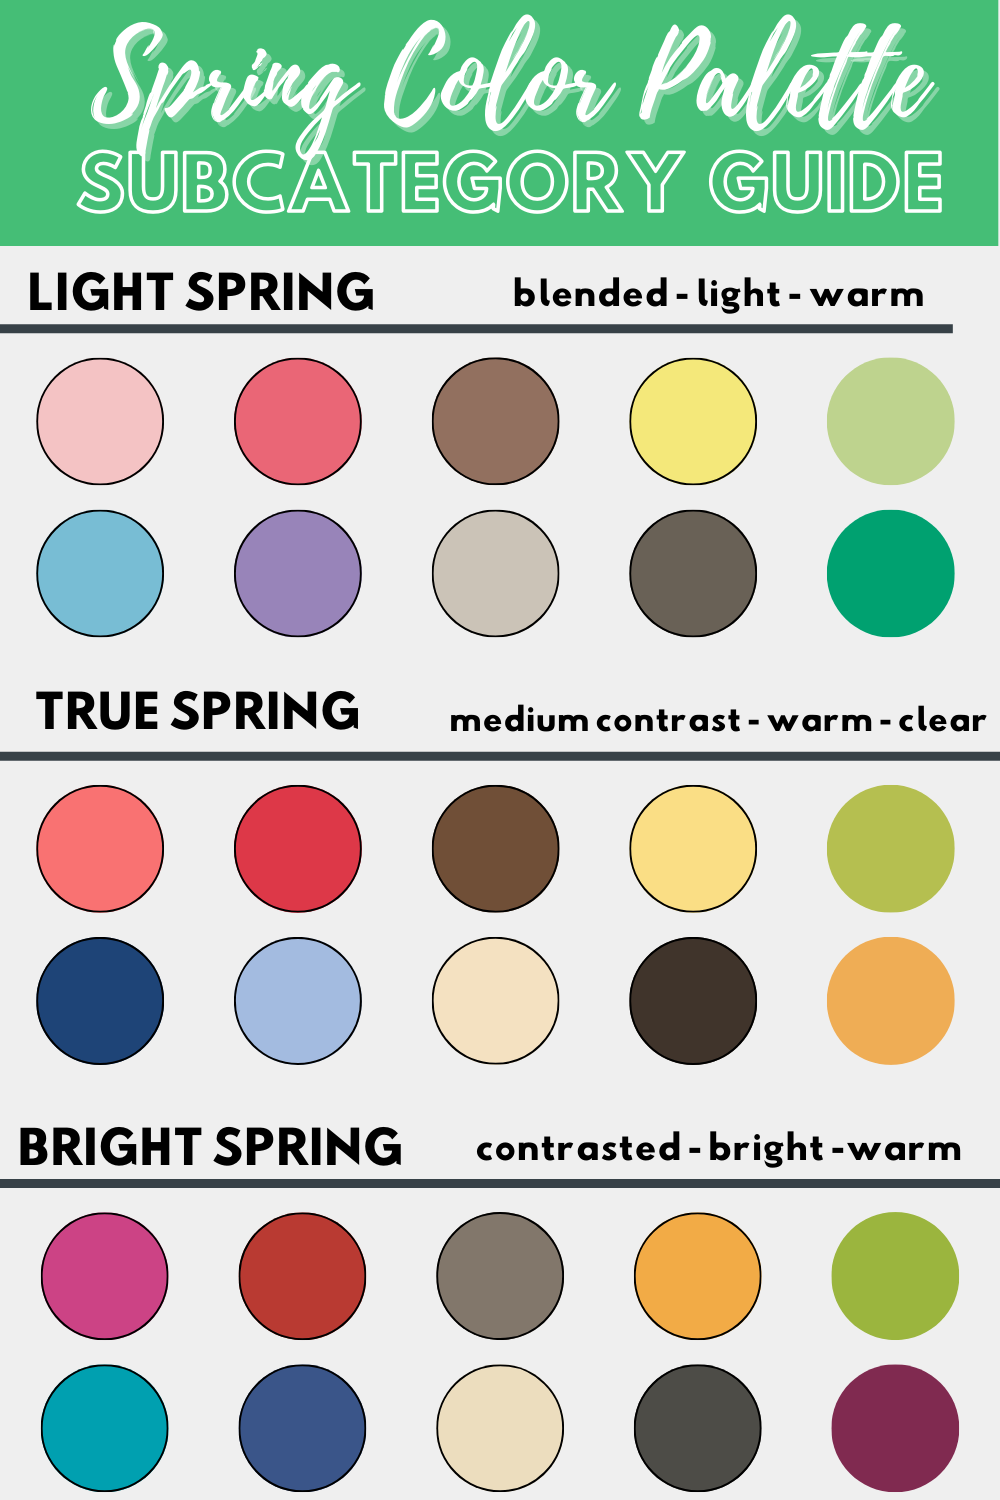 Spring Color Palette guide using color analysis to determine shades that will look best on a spring skin tone